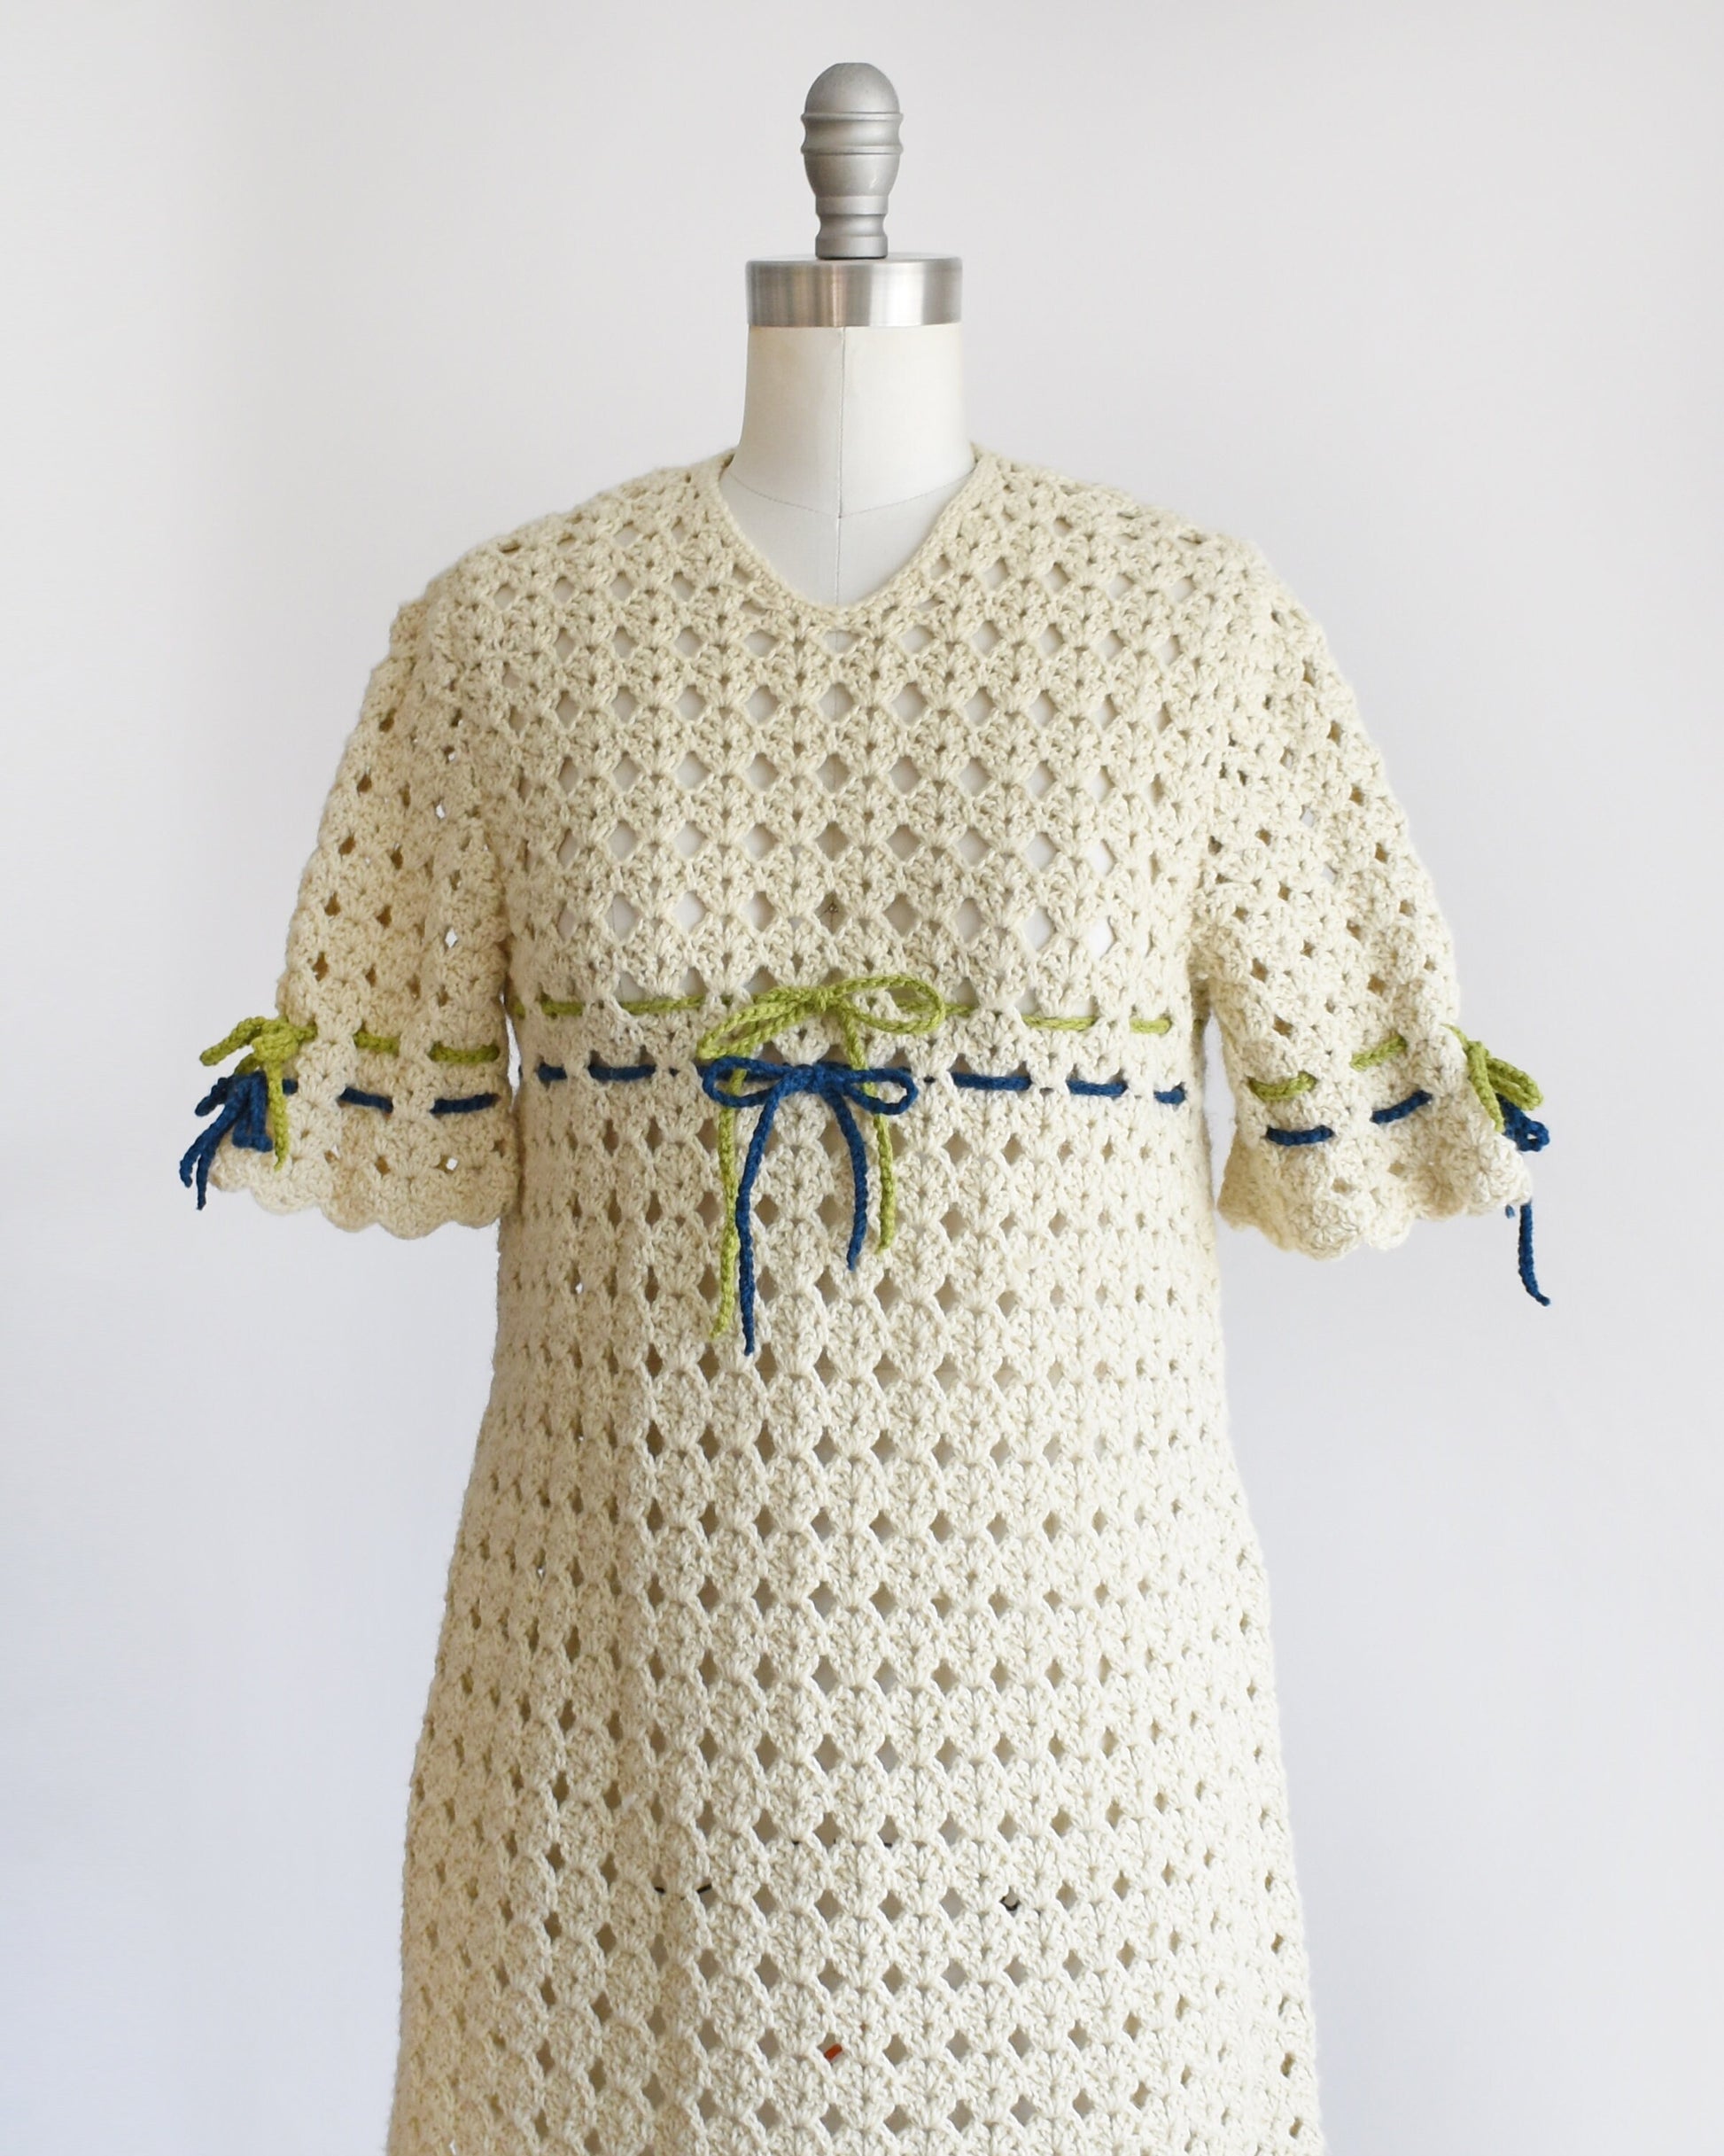 Side front view of a vintage 70s crochet mini dress with a green and blue woven stripe on the front that ties into a bow, along with matching stripes and bows on the sleeves. The dress is on a dress form.